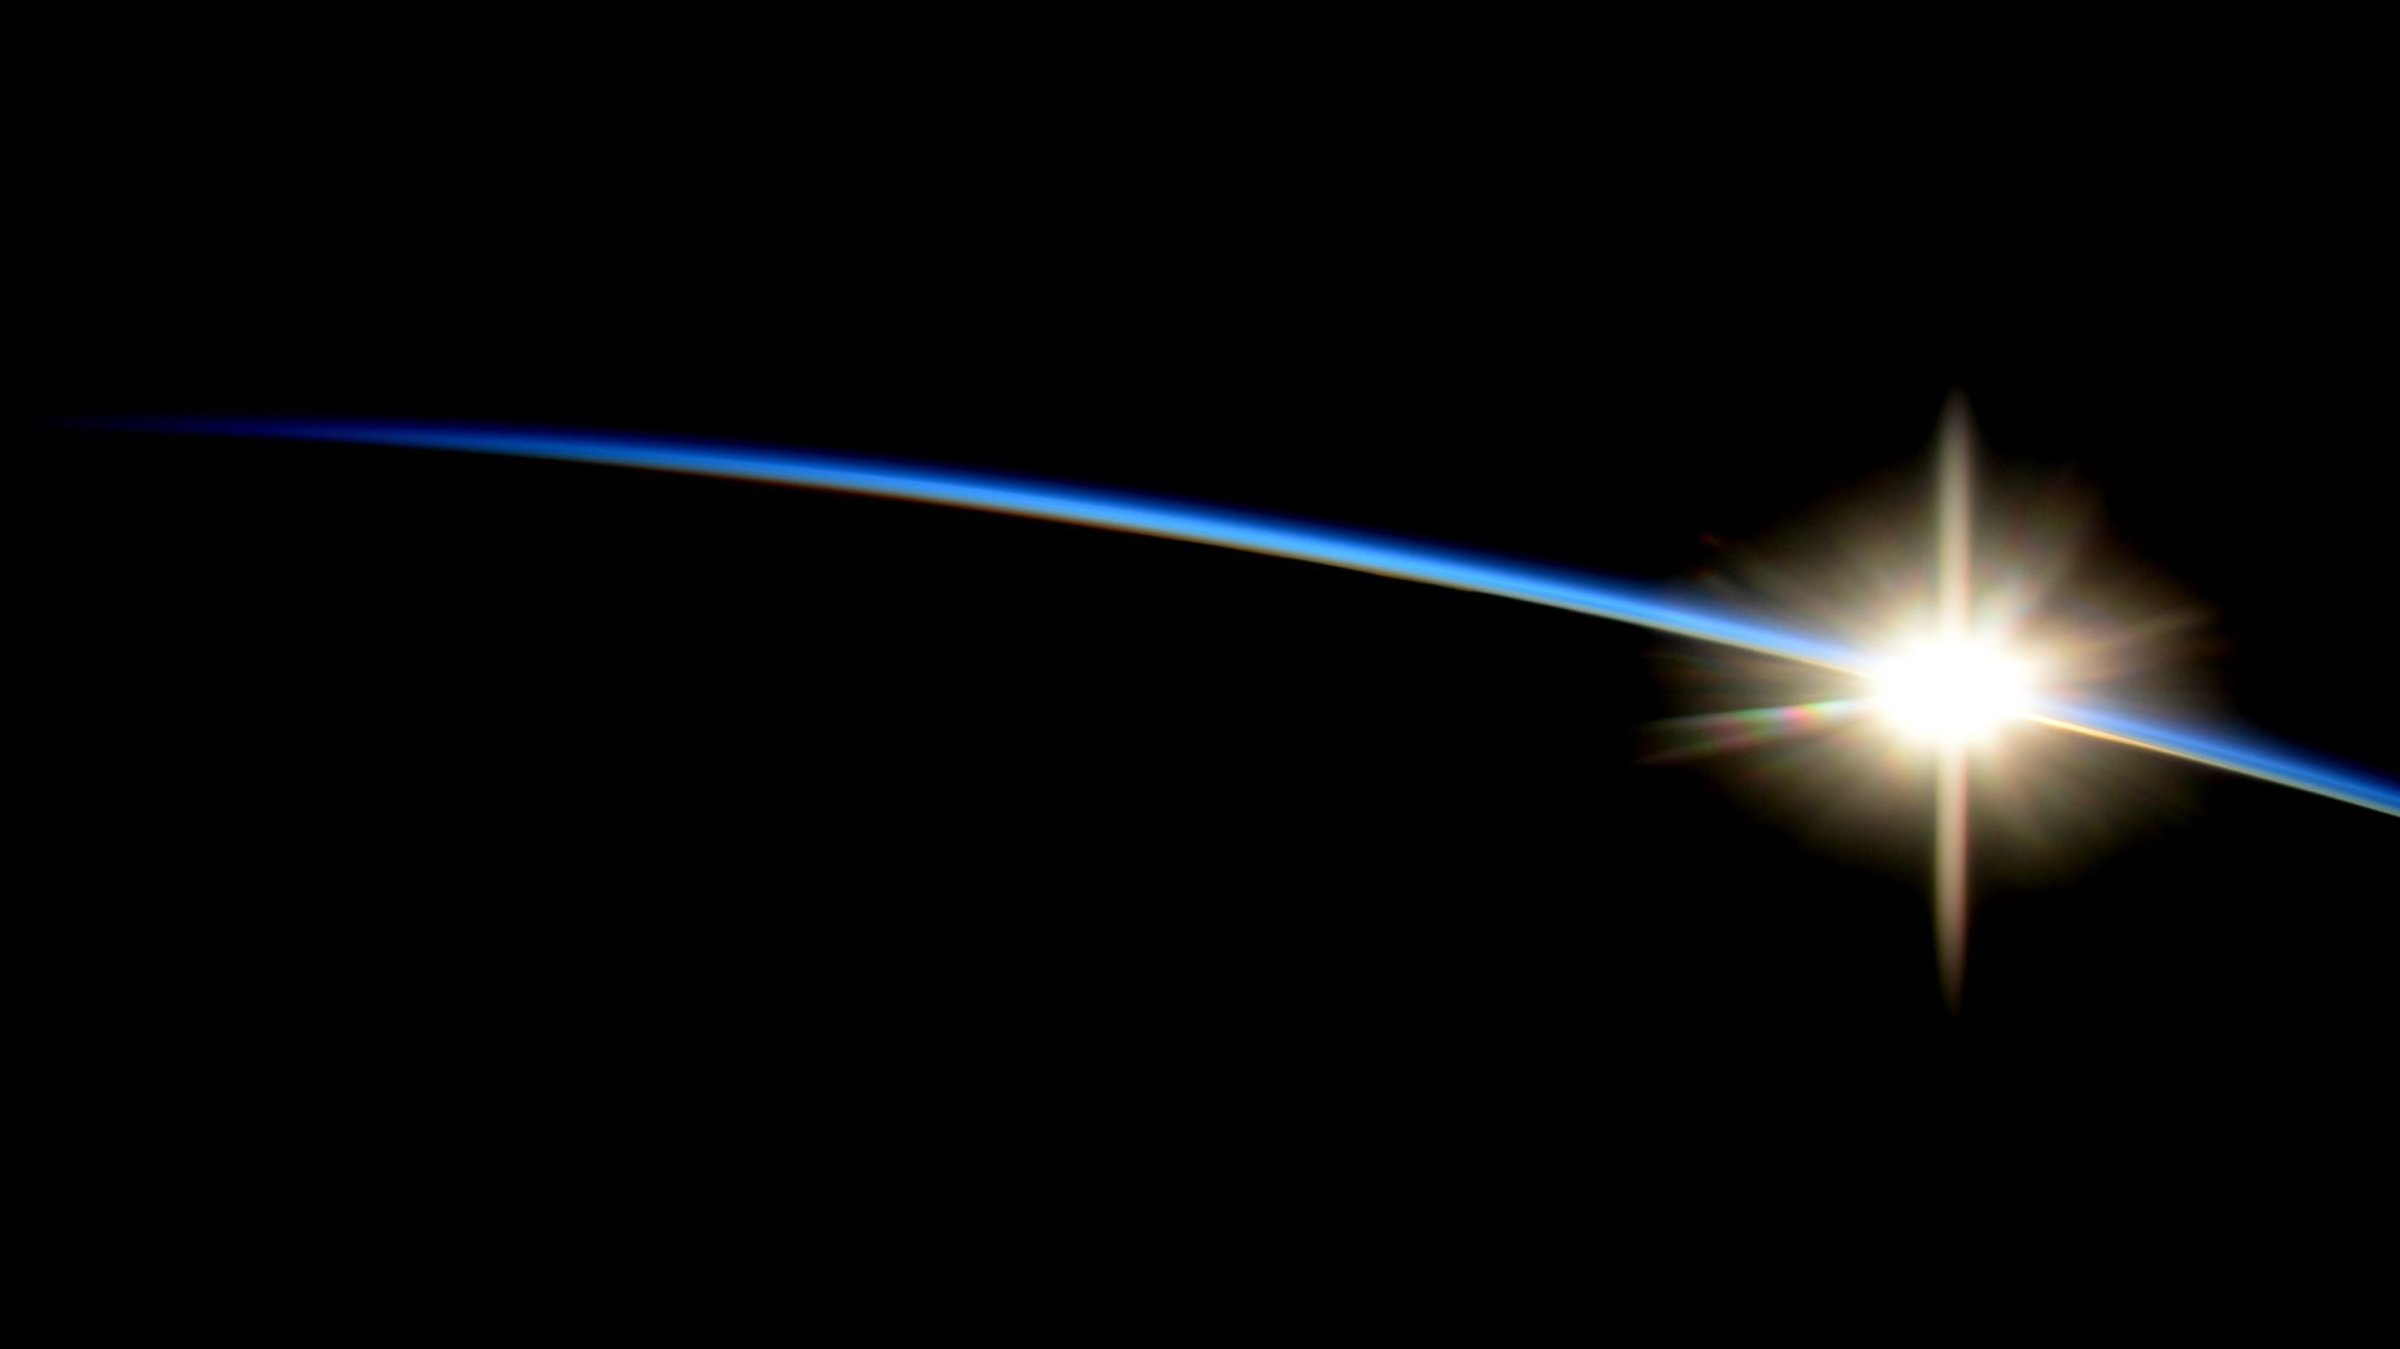 Sunrise seen from the International Space Station